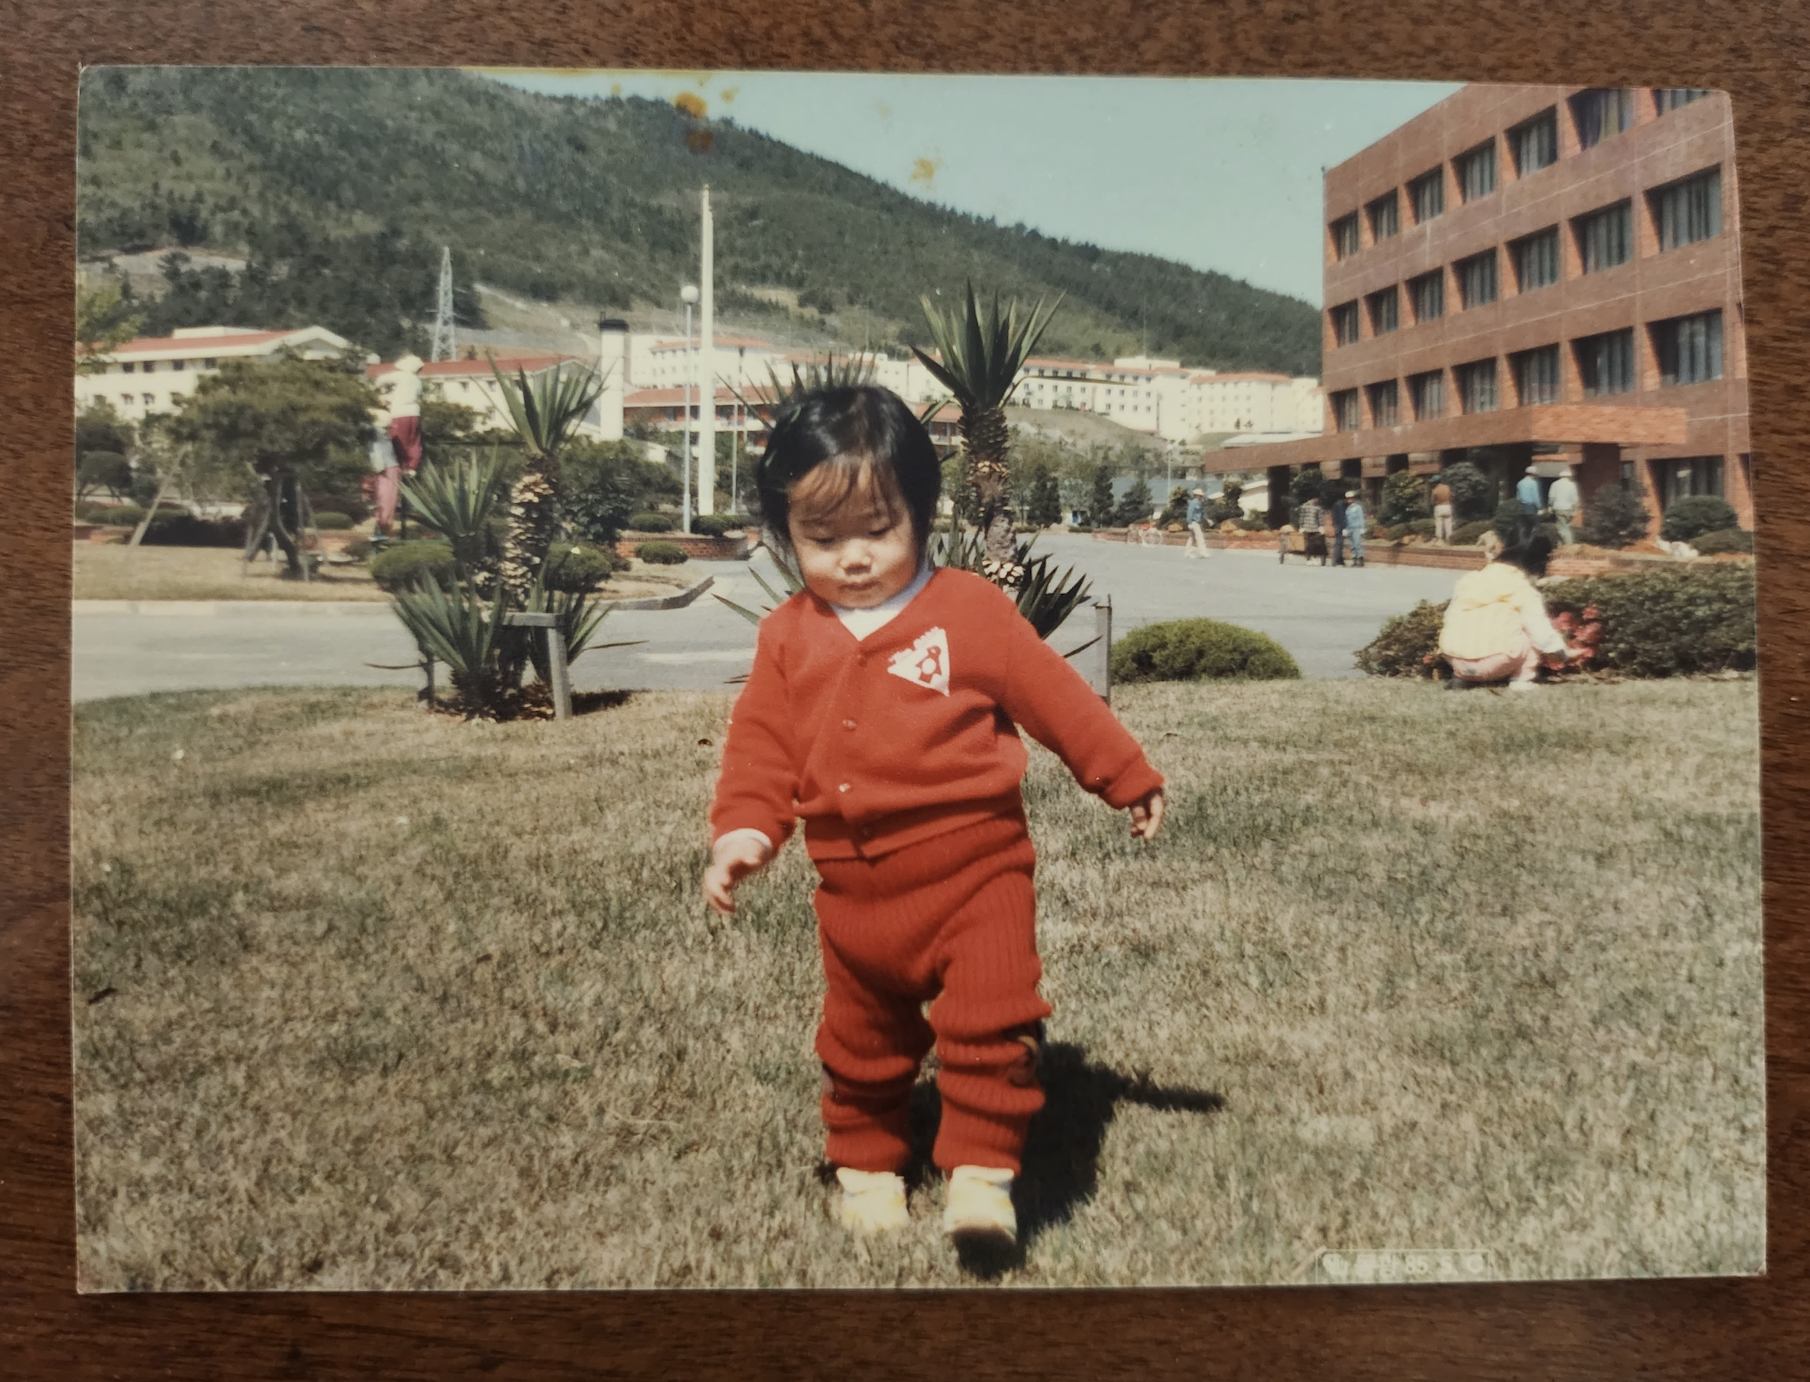 Mrs. Je brings back a childhood photo of the three-year-old herself in Geoje. She poses in front of her fathers workplace. Photo courtesy of Mrs. Je.